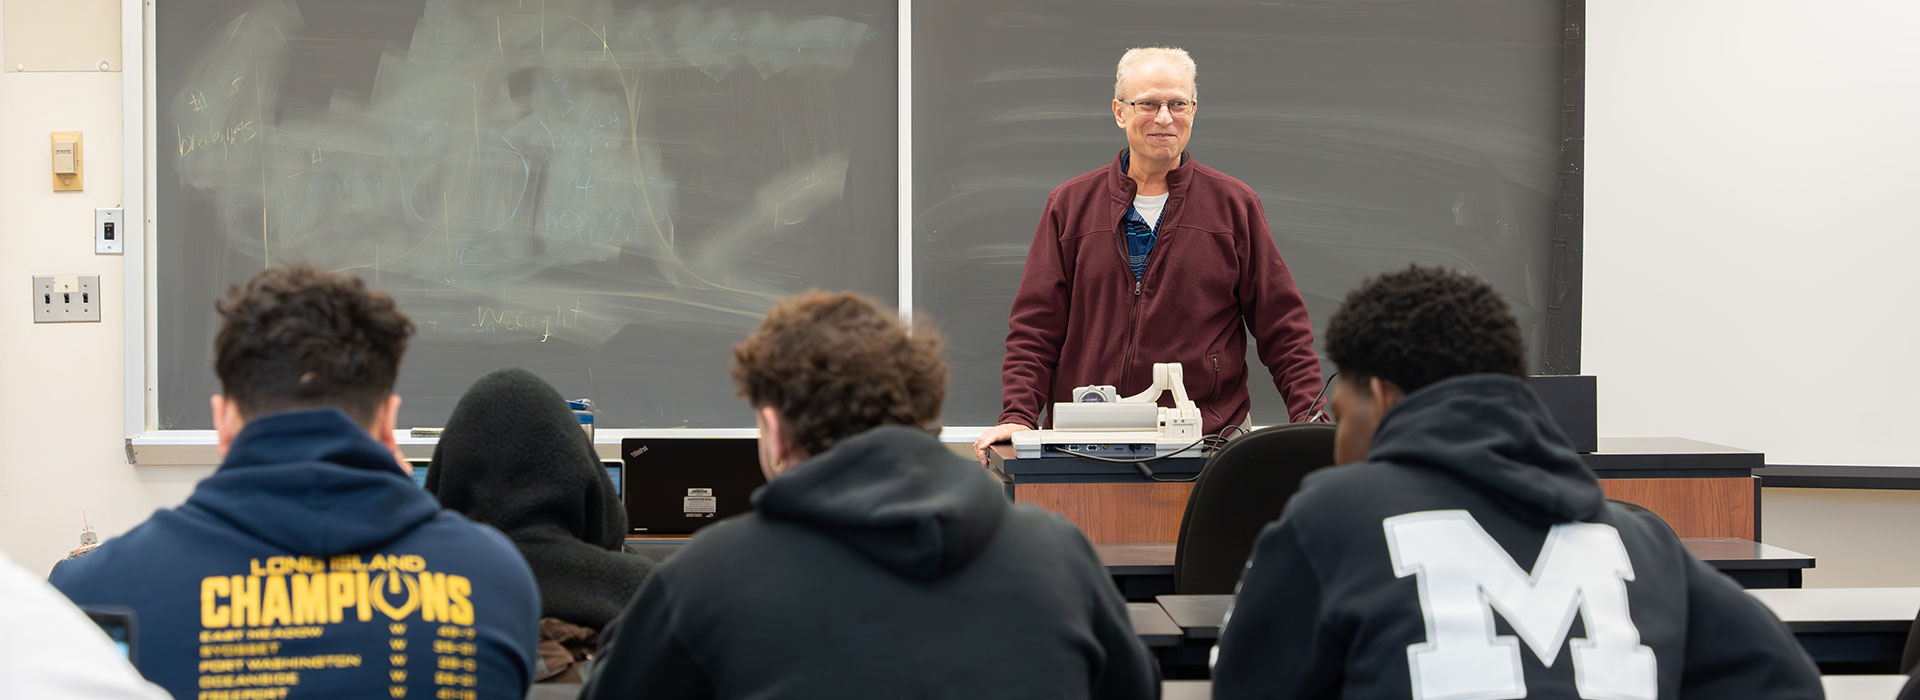 Christopher Scalzo, professor of business at SUNY Morrisville, teaches in his Morrisville classroom.